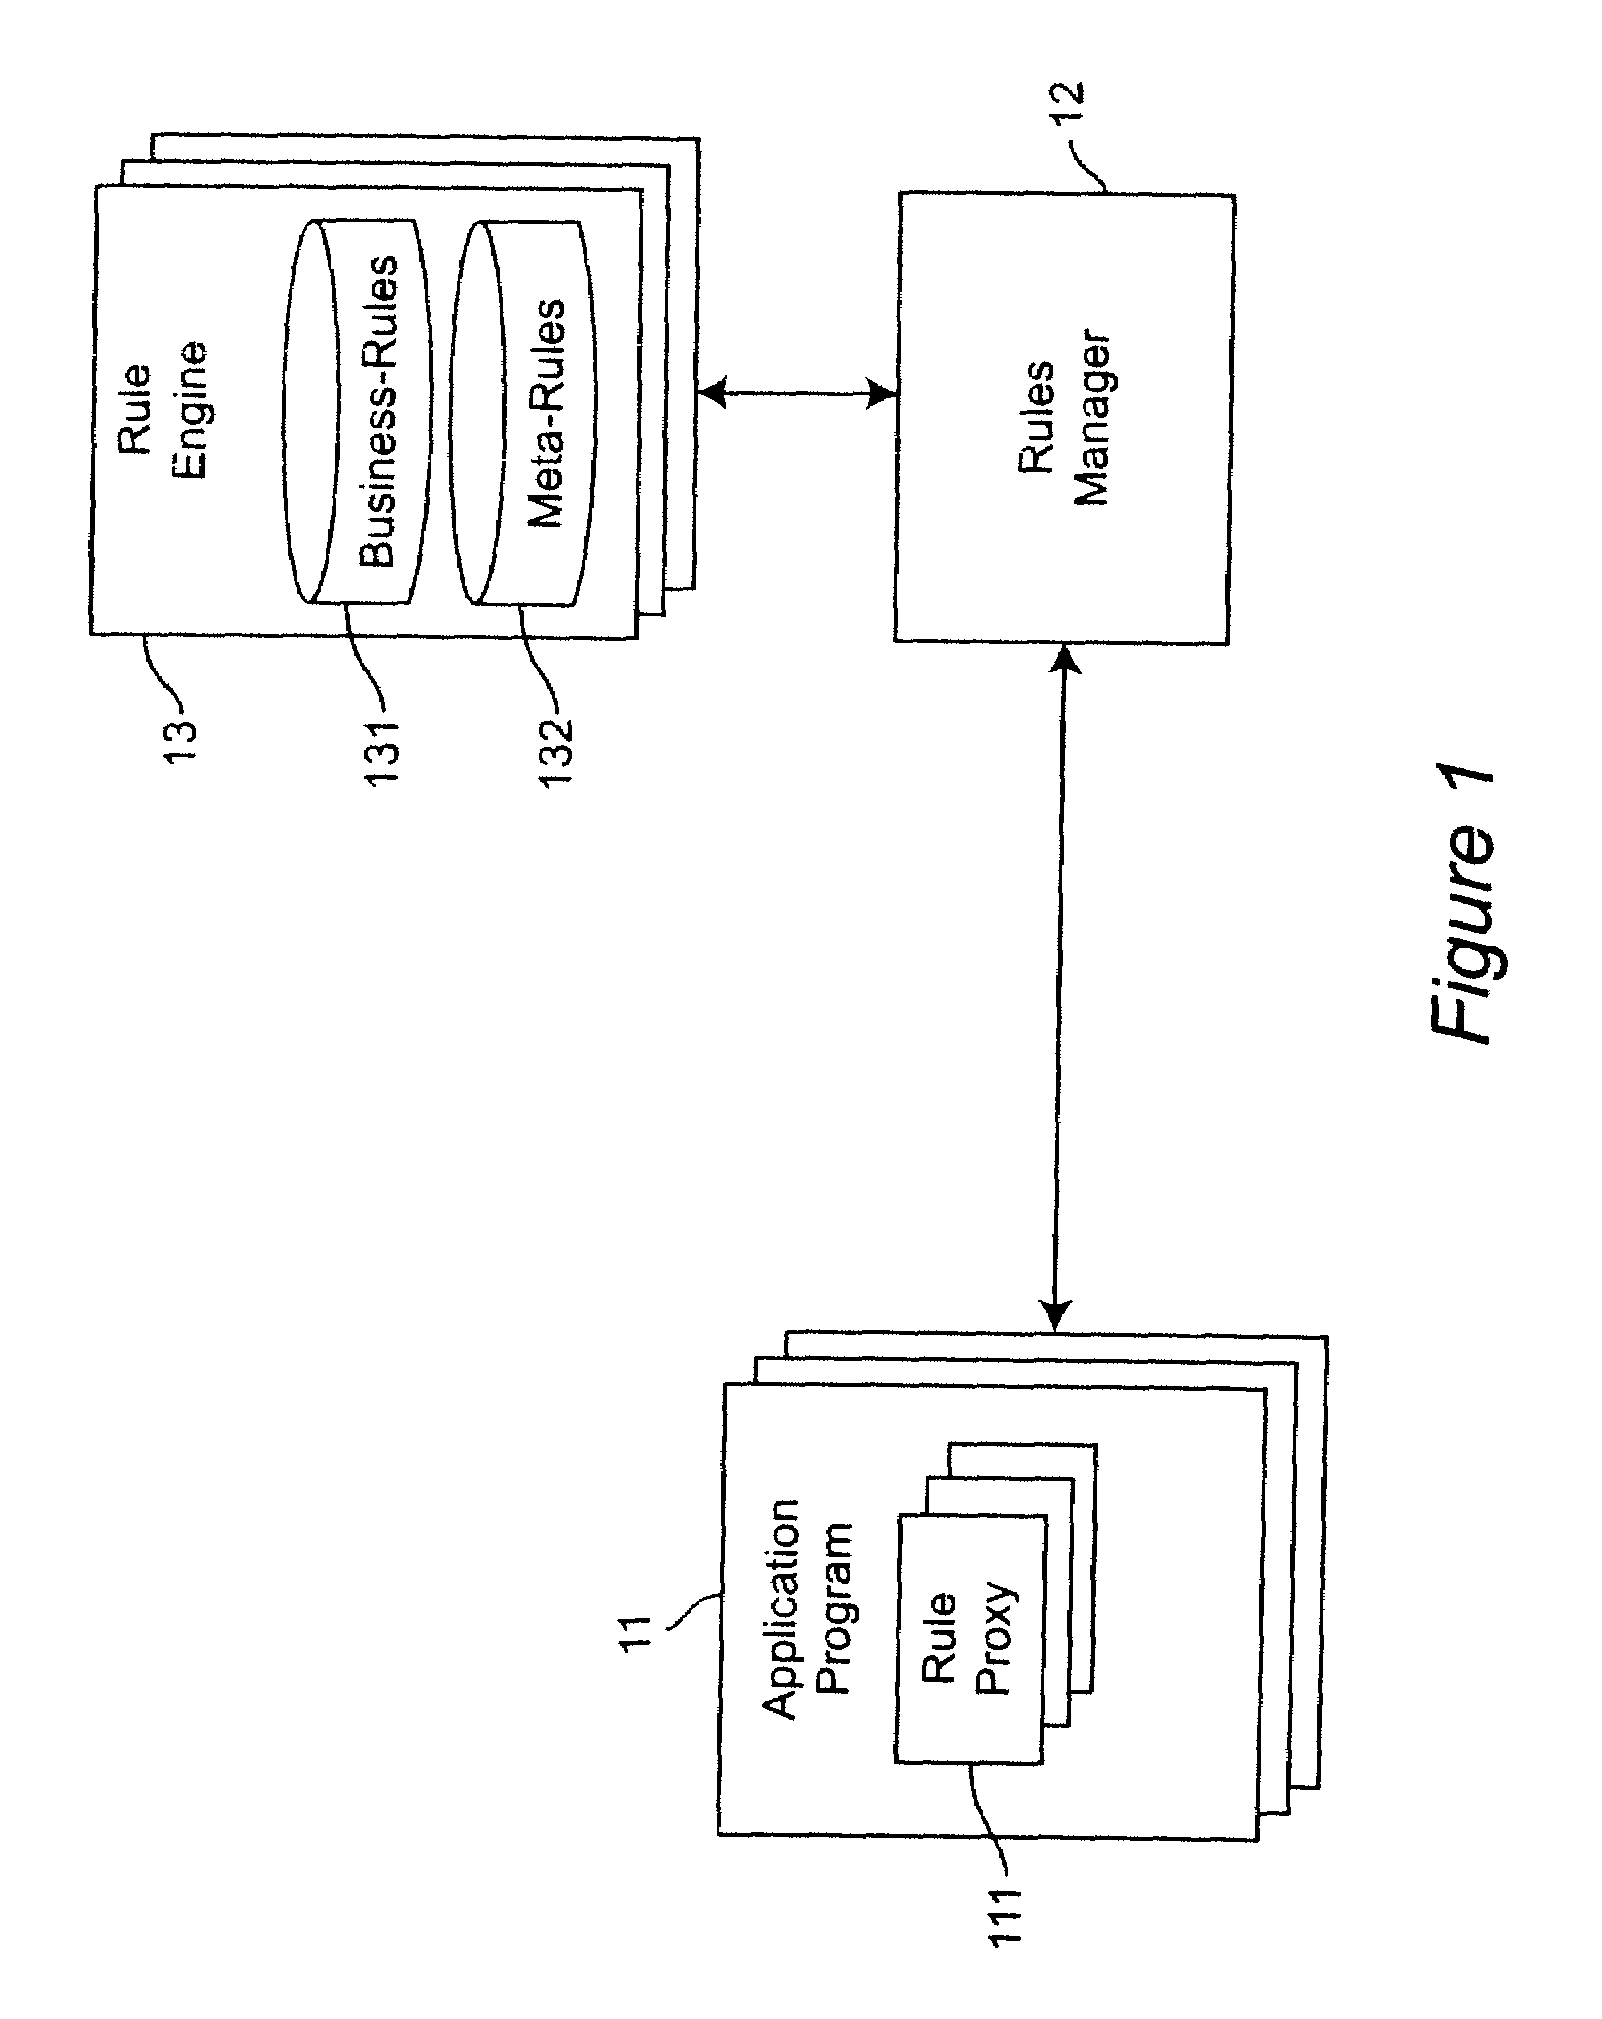 Method and Apparatus for Using Meta-Rules to Support Dynamic Rule-Based Business Systems